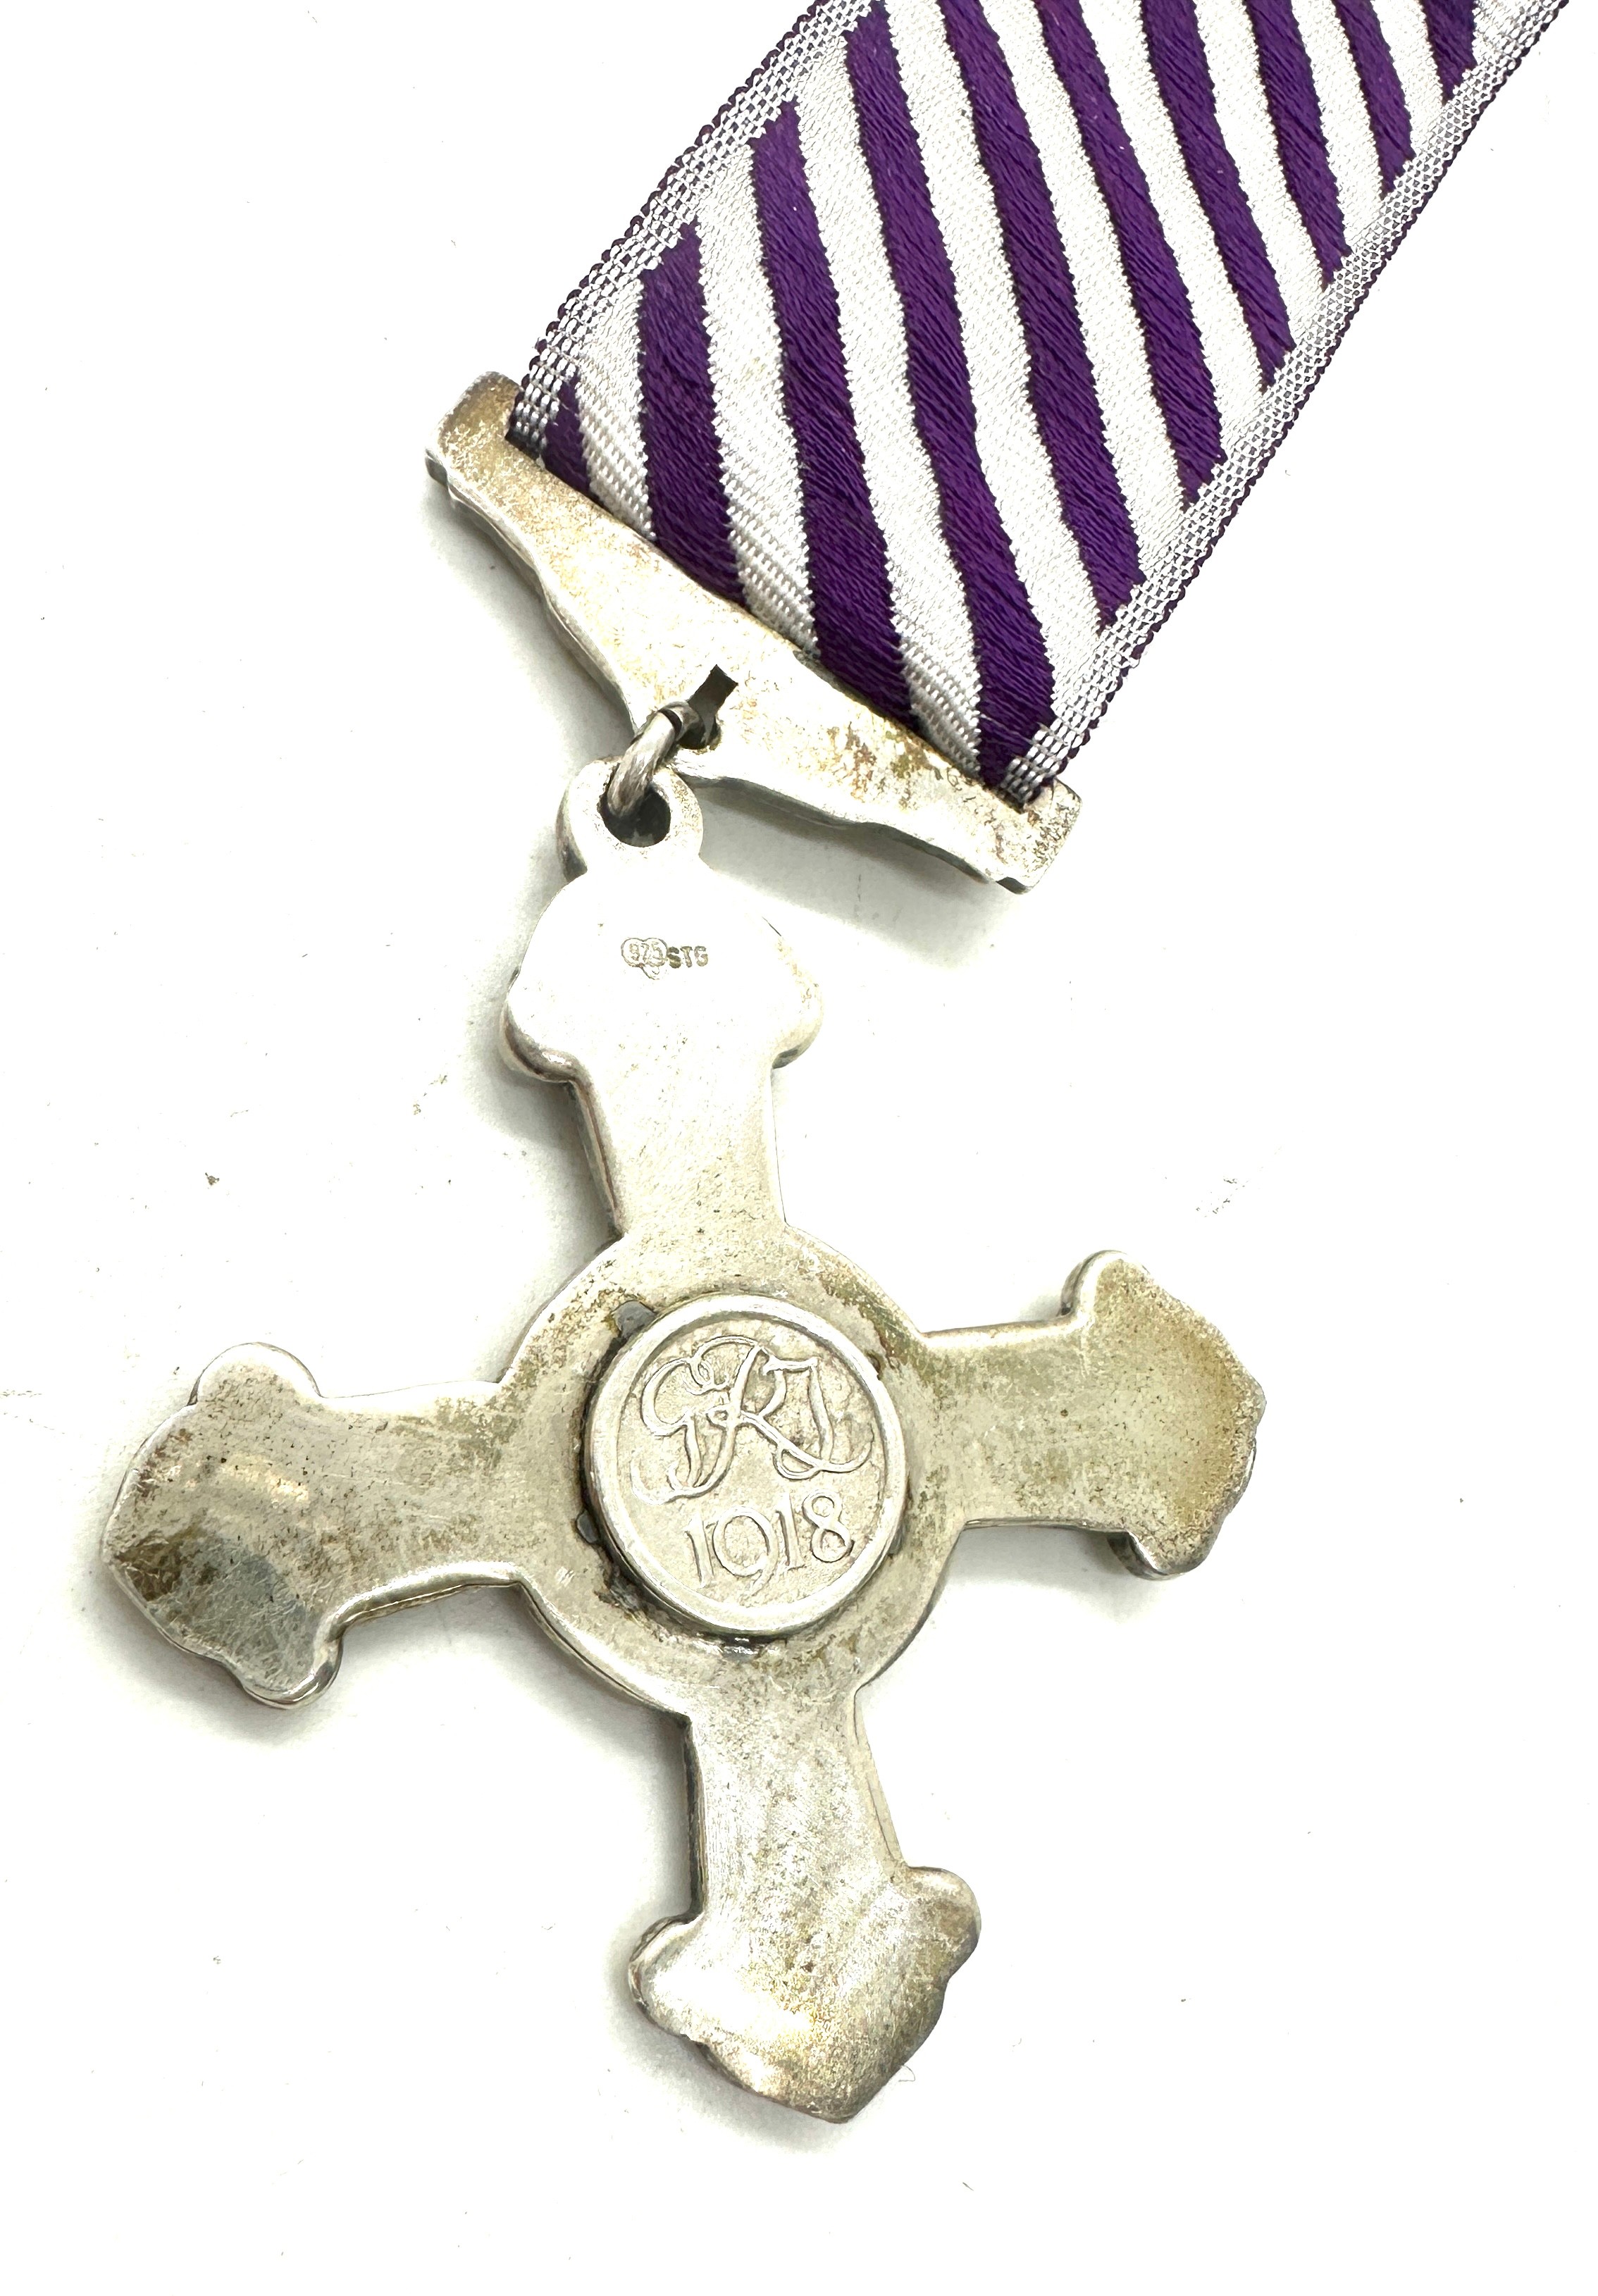 Replica of a 1918 Silver flying cross medal in original box - Image 4 of 4